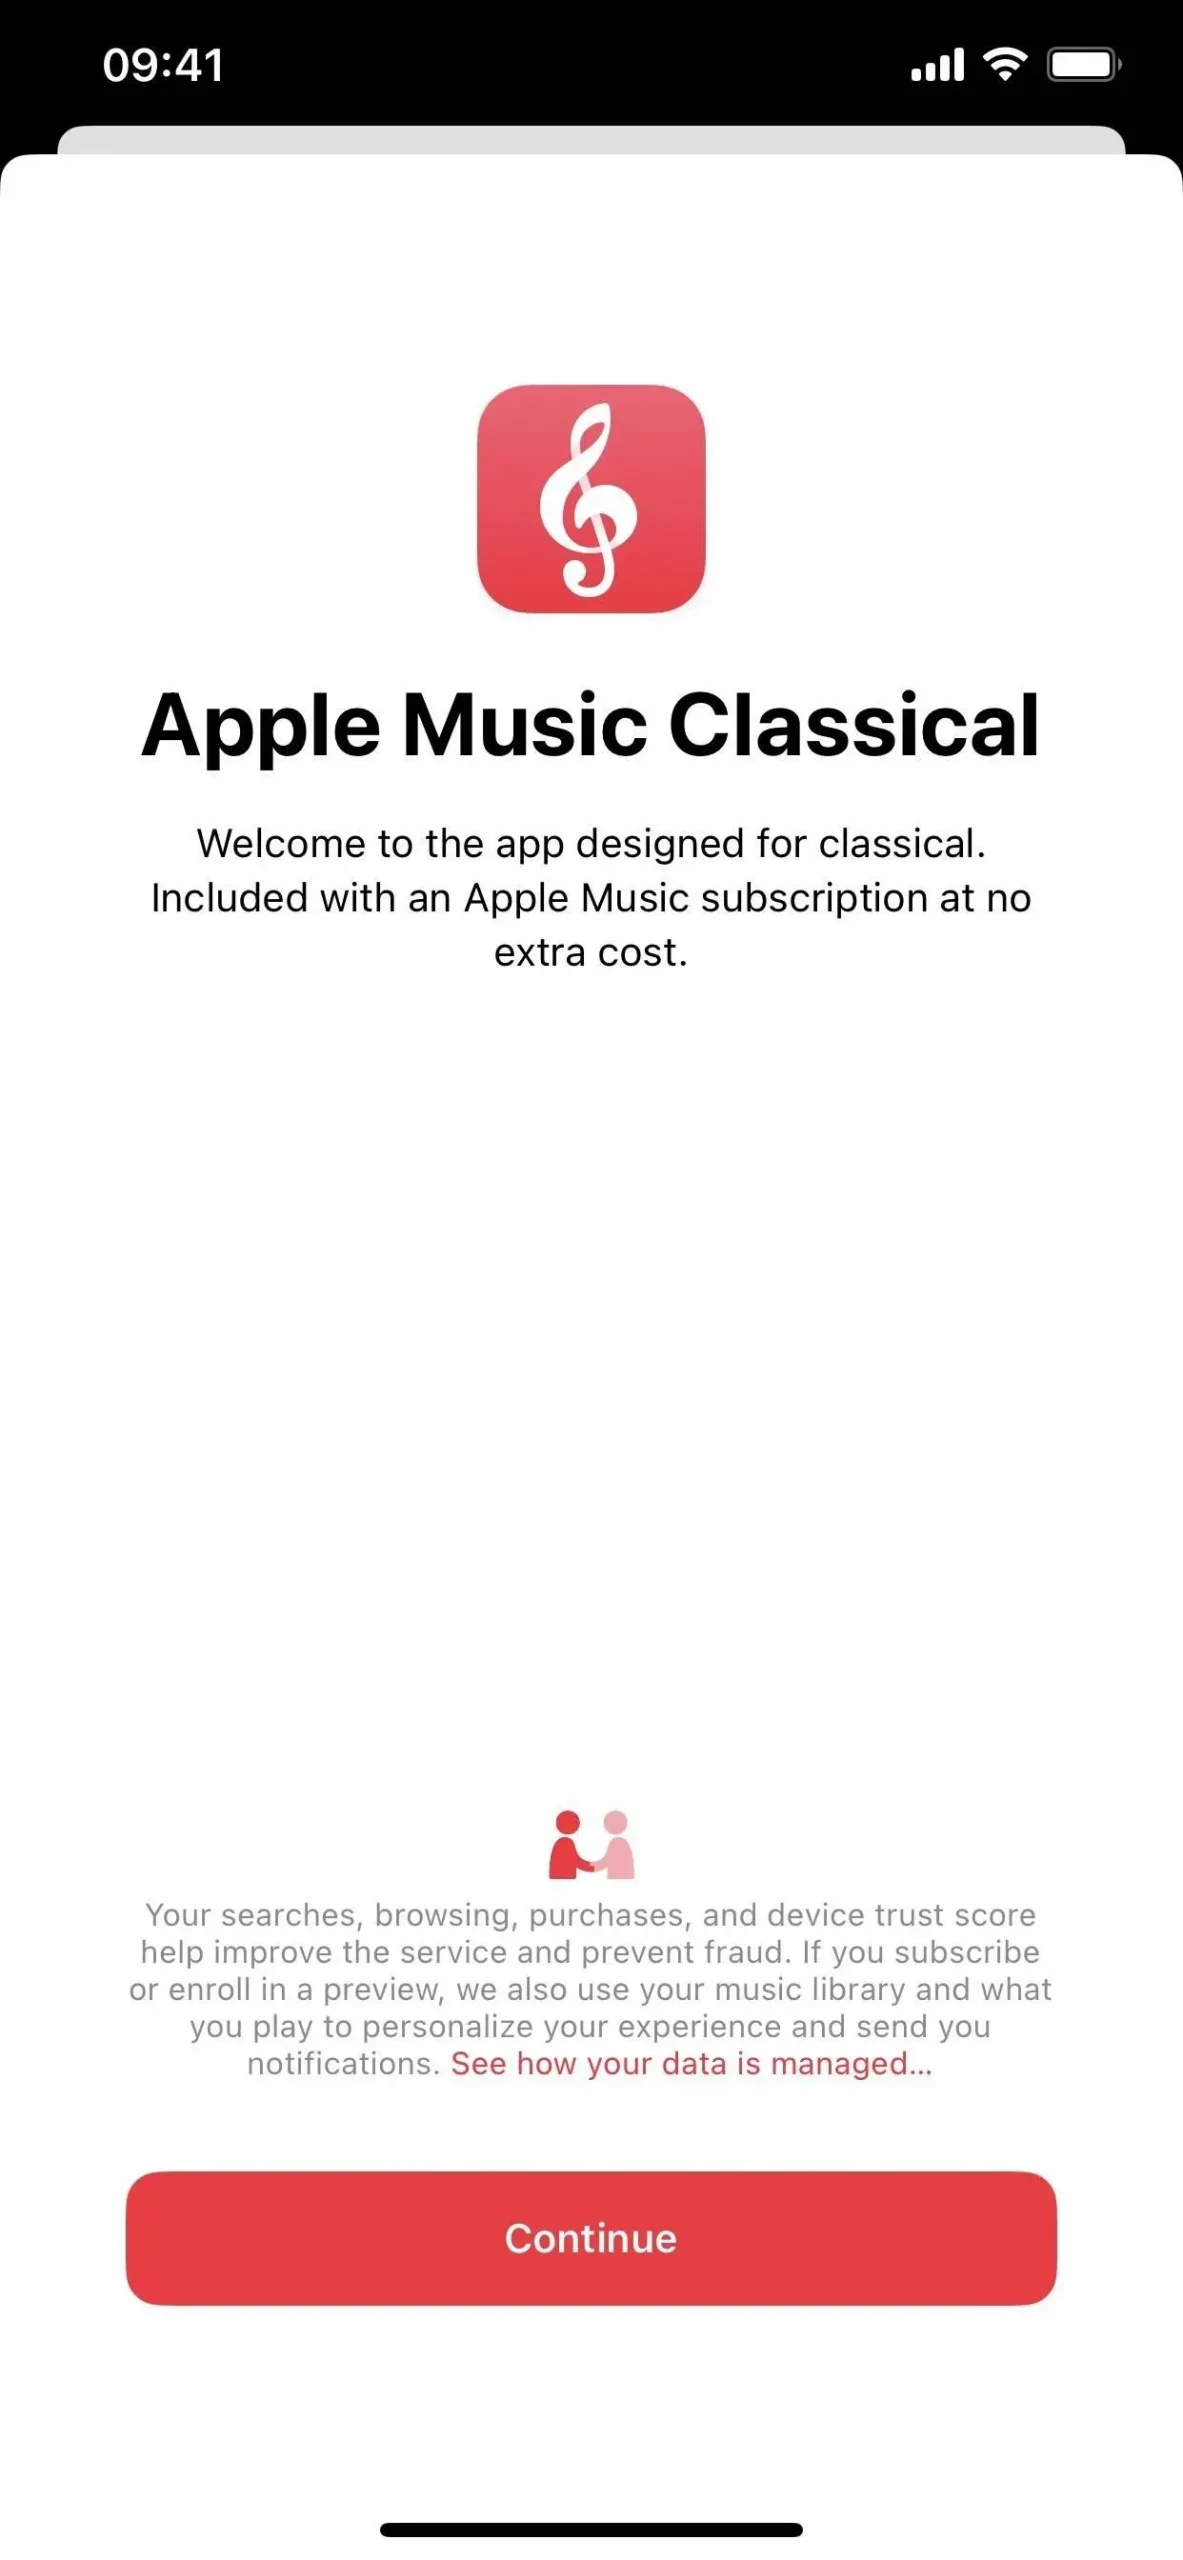 Apple Music Subscribers Just Got a Massive New iPhone Feature